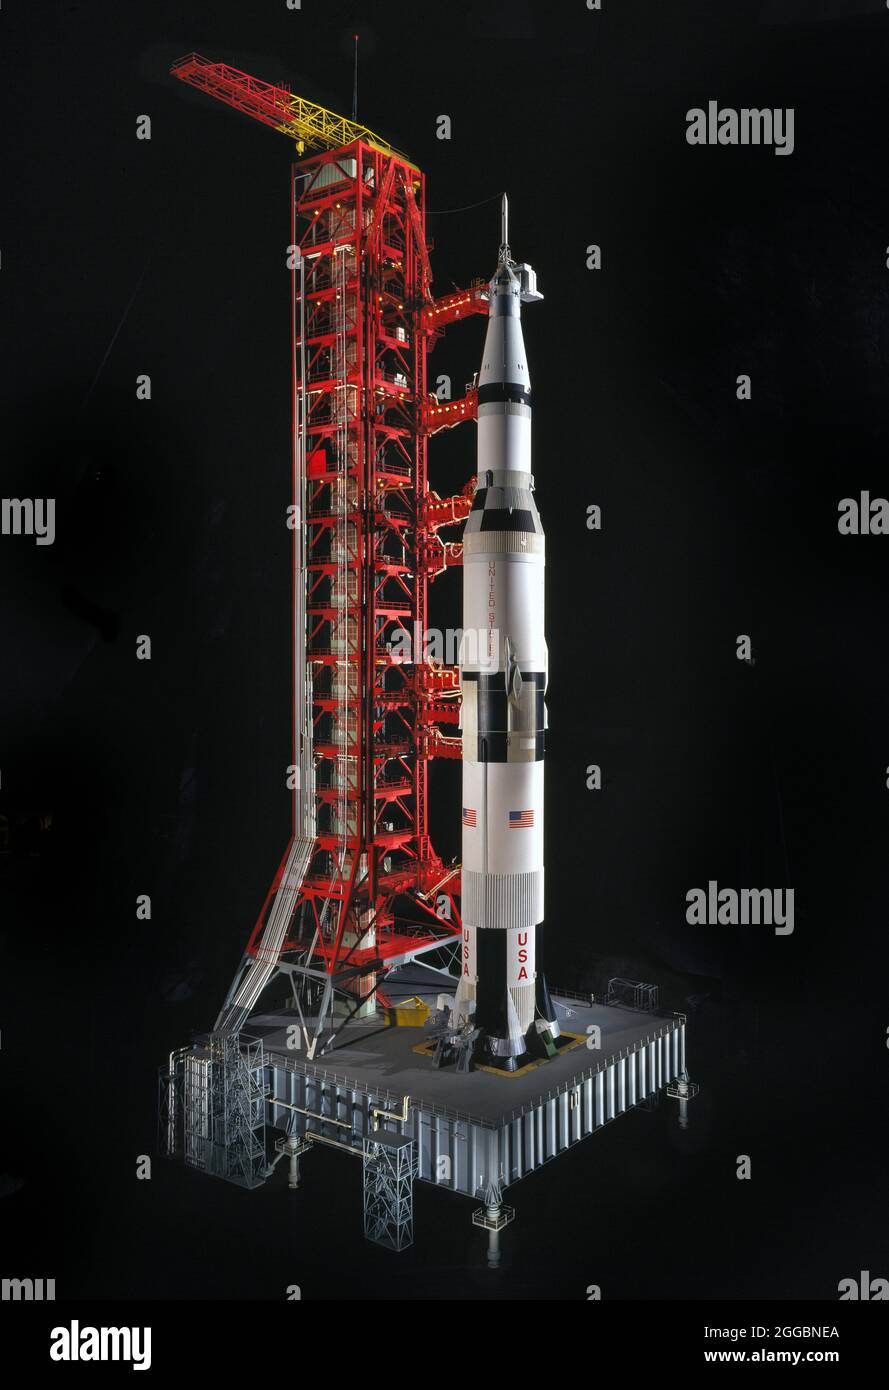 Model, Rocket, Saturn V, 1975. This is a 1:34 scale model of the Saturn V and its launch tower. The Saturn V was one of several rockets developed by the National Aeronautics and Space Administration for use in the Apollo program. America's largest operational launch vehicle, a Saturn V first launched a manned Apollo spacecraft in December 1968 when the crew of Apollo 8 were placed into lunar orbit. In July 1969, the rocket sent astronauts Neil Armstrong and Edward Aldrin, Jr. of Apollo 11 to the surface of the moon, while Michael Collins remained in lunar orbit. Saturn V was utilized in the re Stock Photo